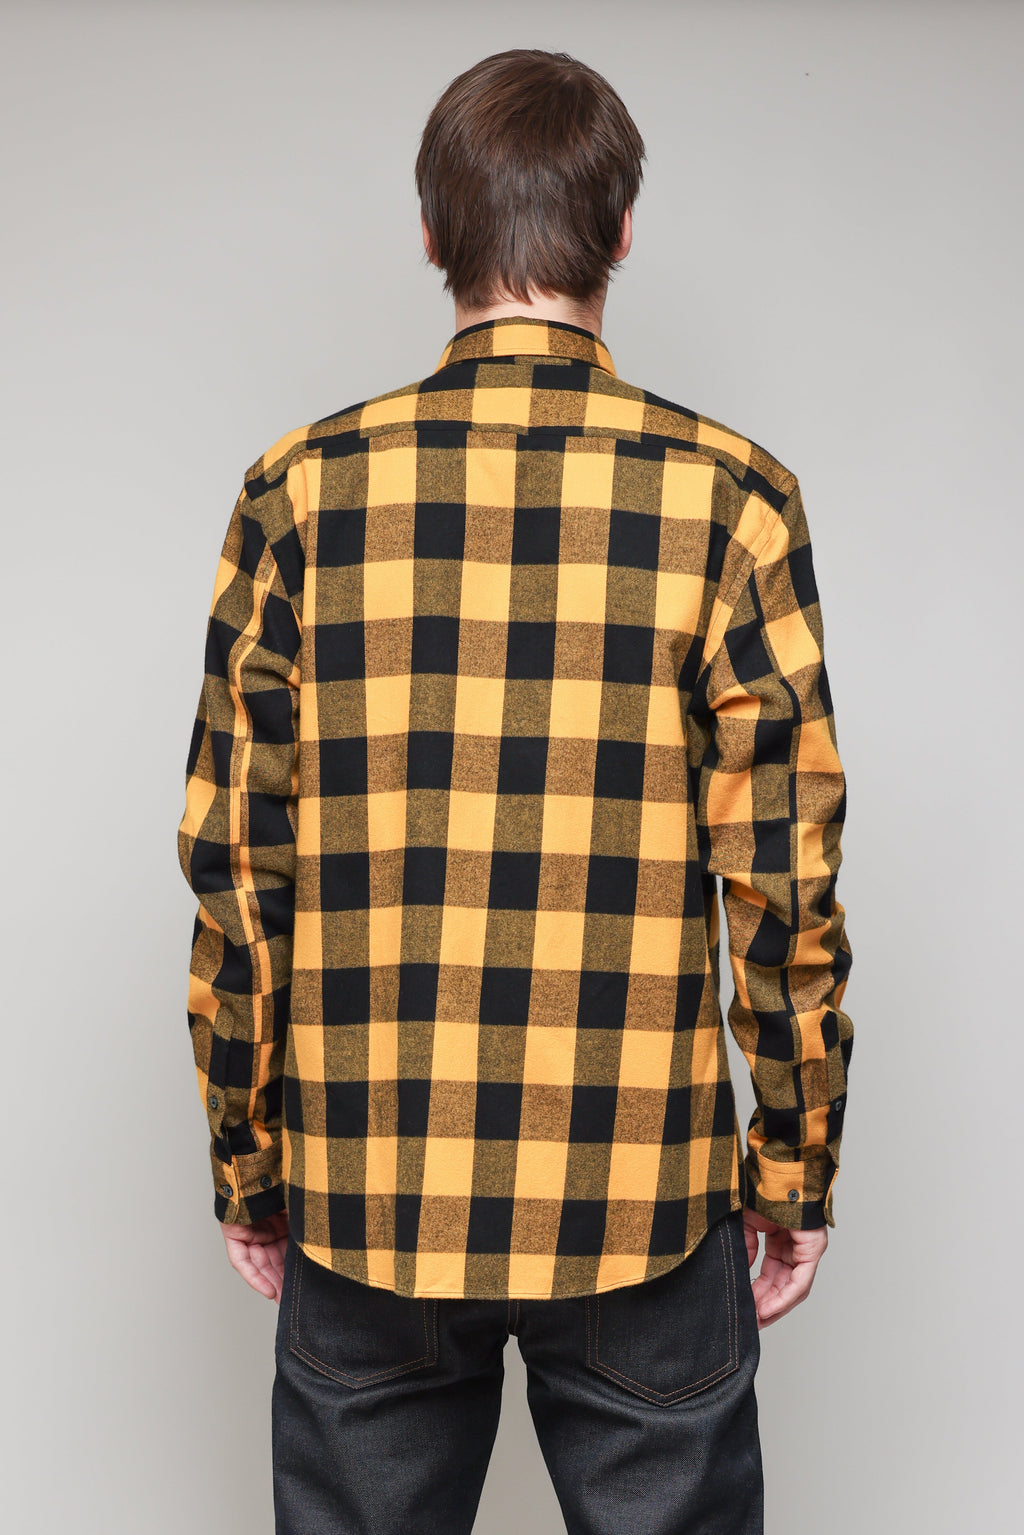 Japanese Brushed Buffalo Plaid in Yellow and Black 04